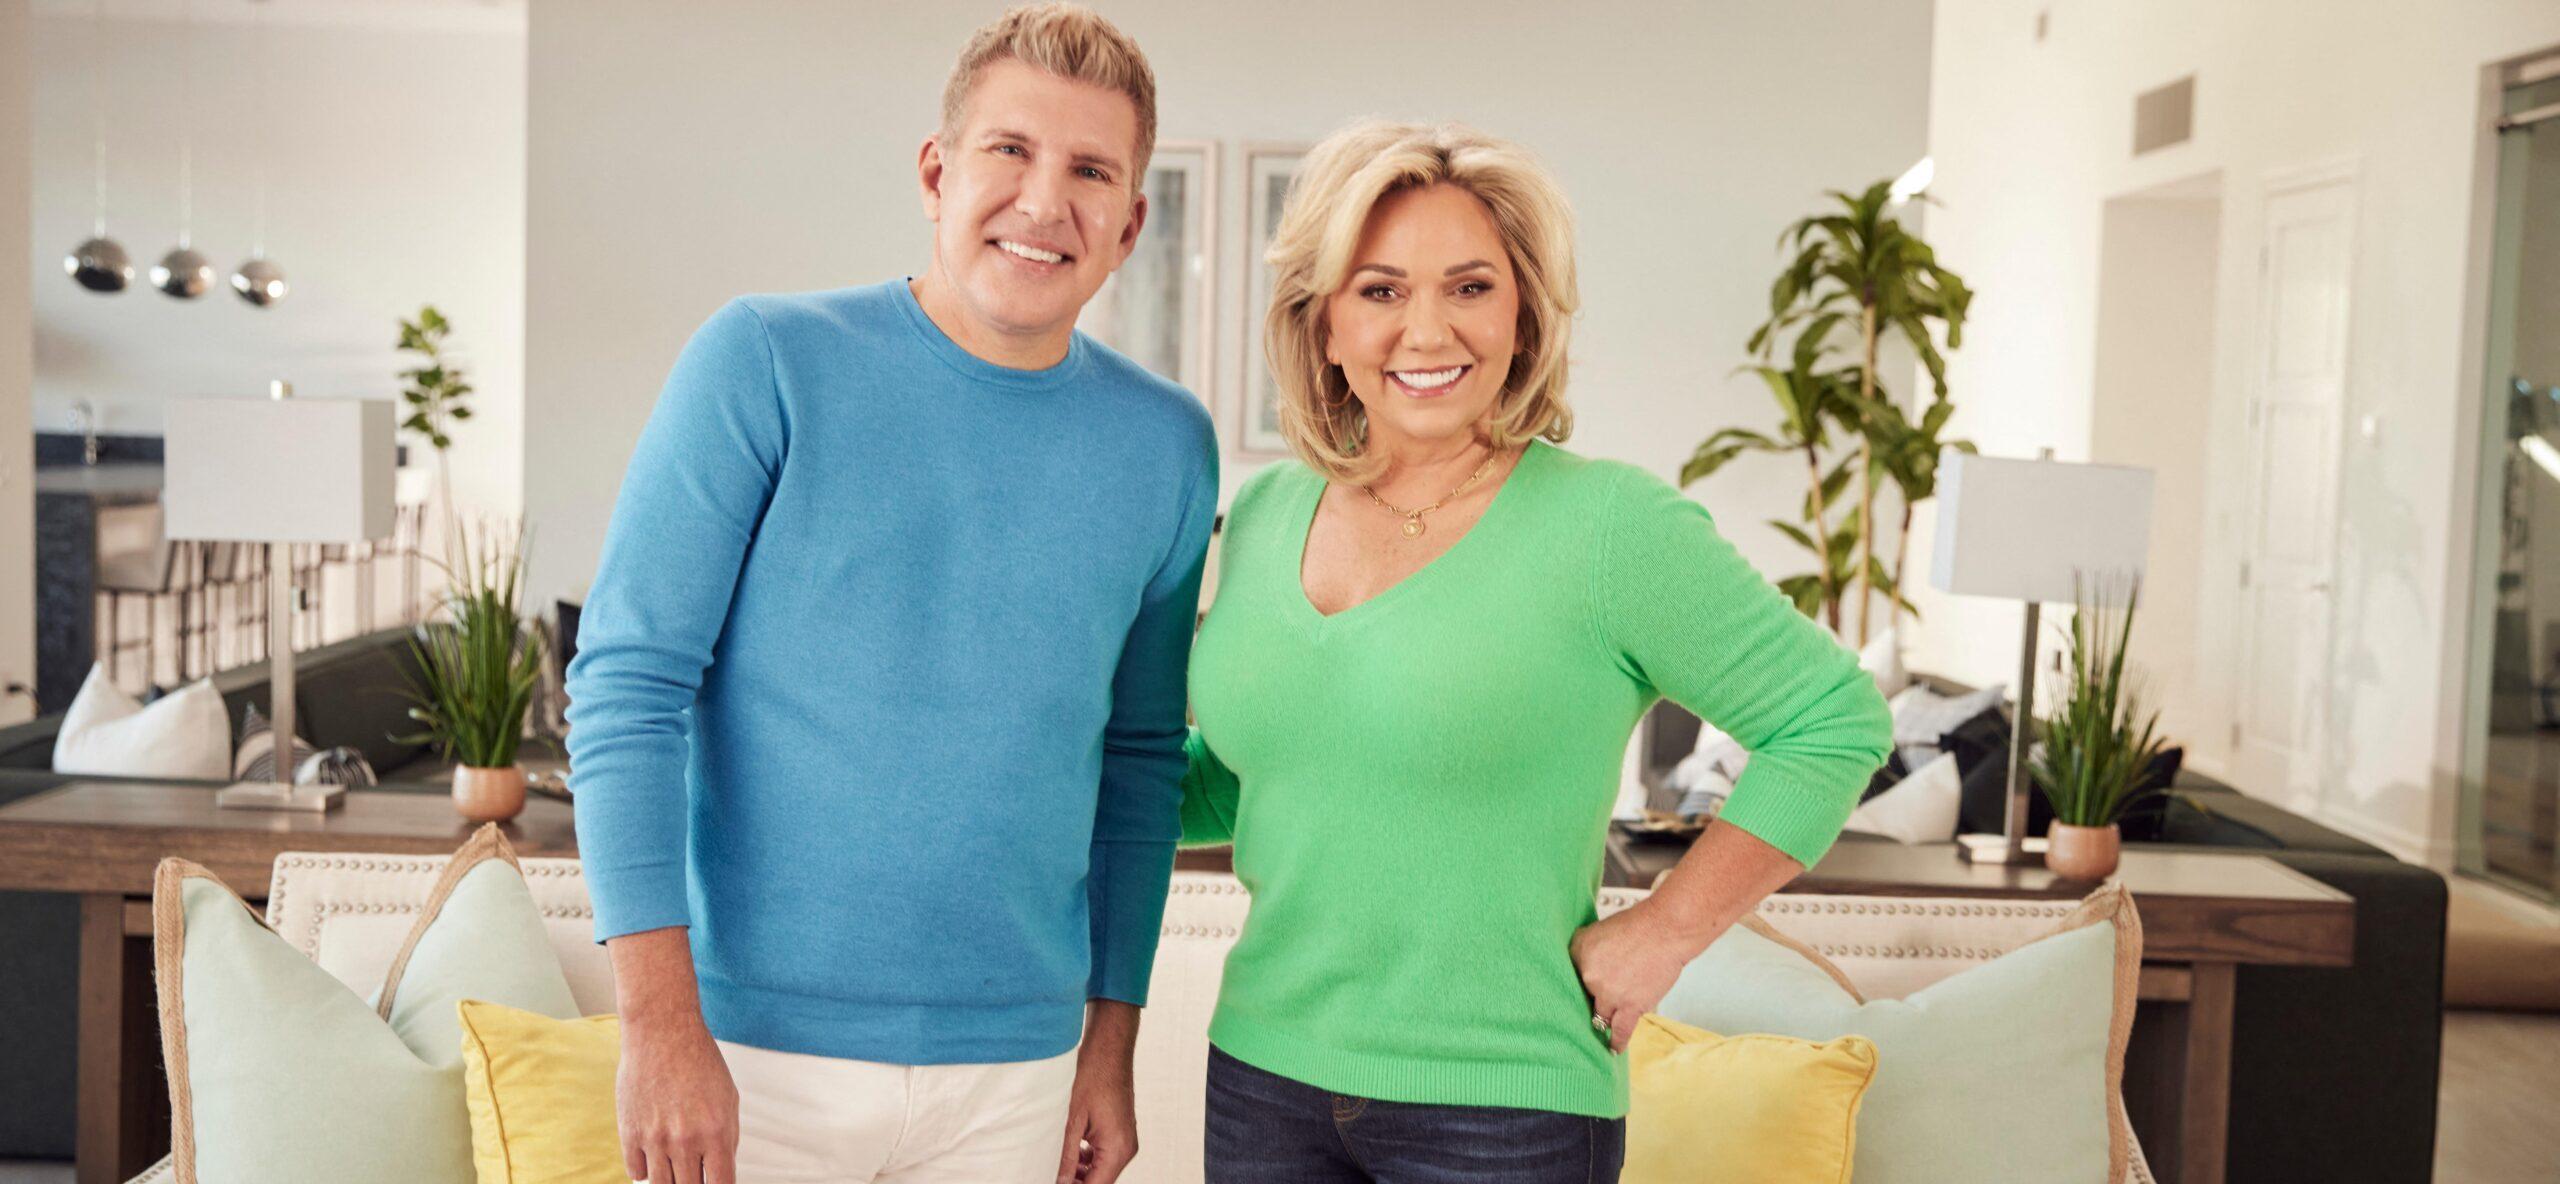 Todd & Julie Chrisley Living Among ‘Poisonous Snakes’ & ‘Inhumane Conditions’